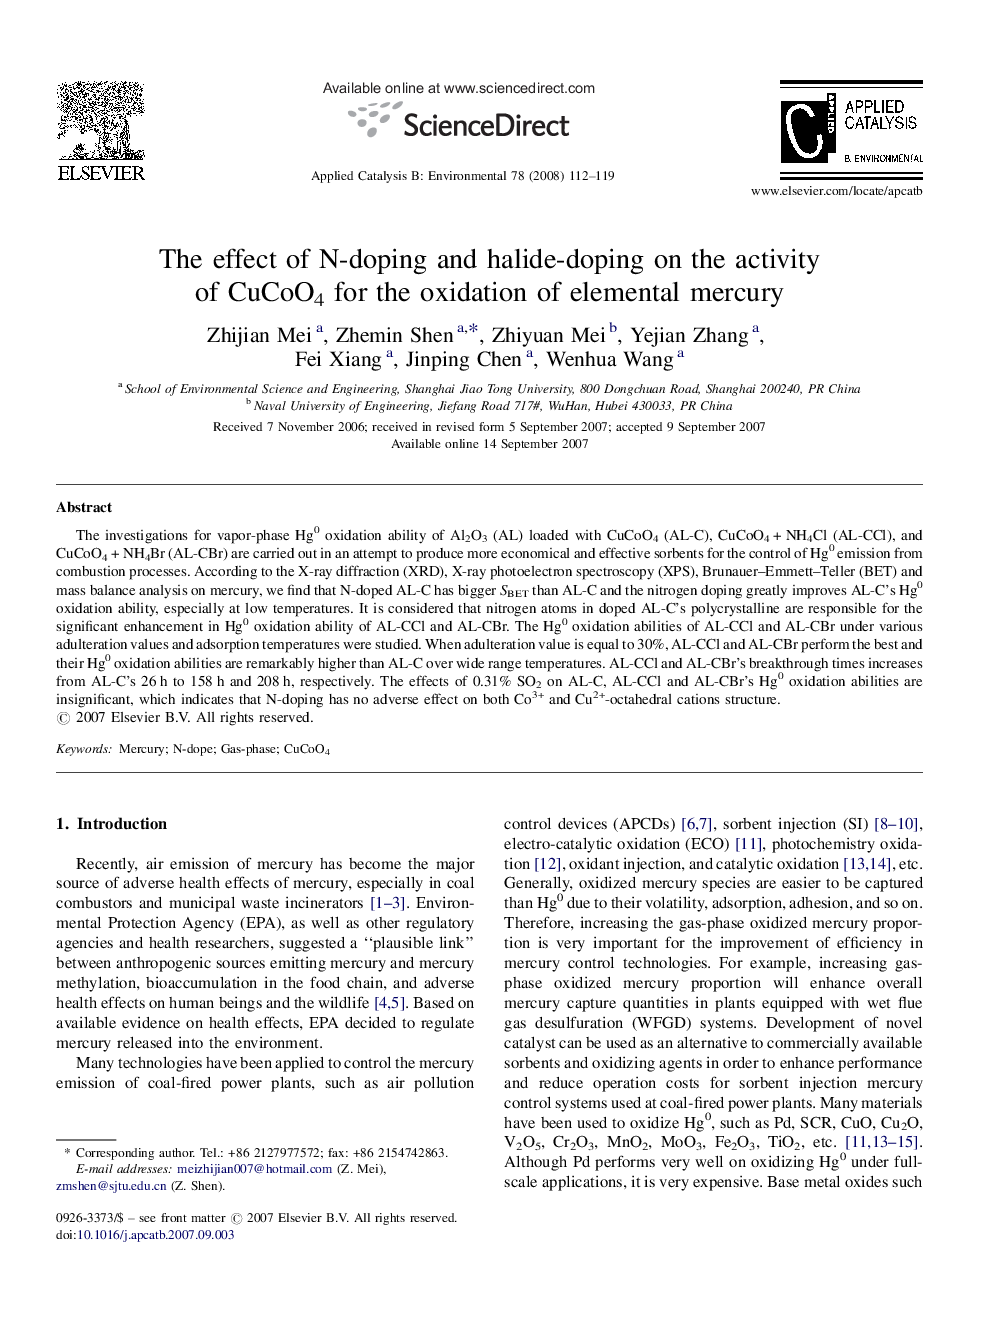 The effect of N-doping and halide-doping on the activity of CuCoO4 for the oxidation of elemental mercury